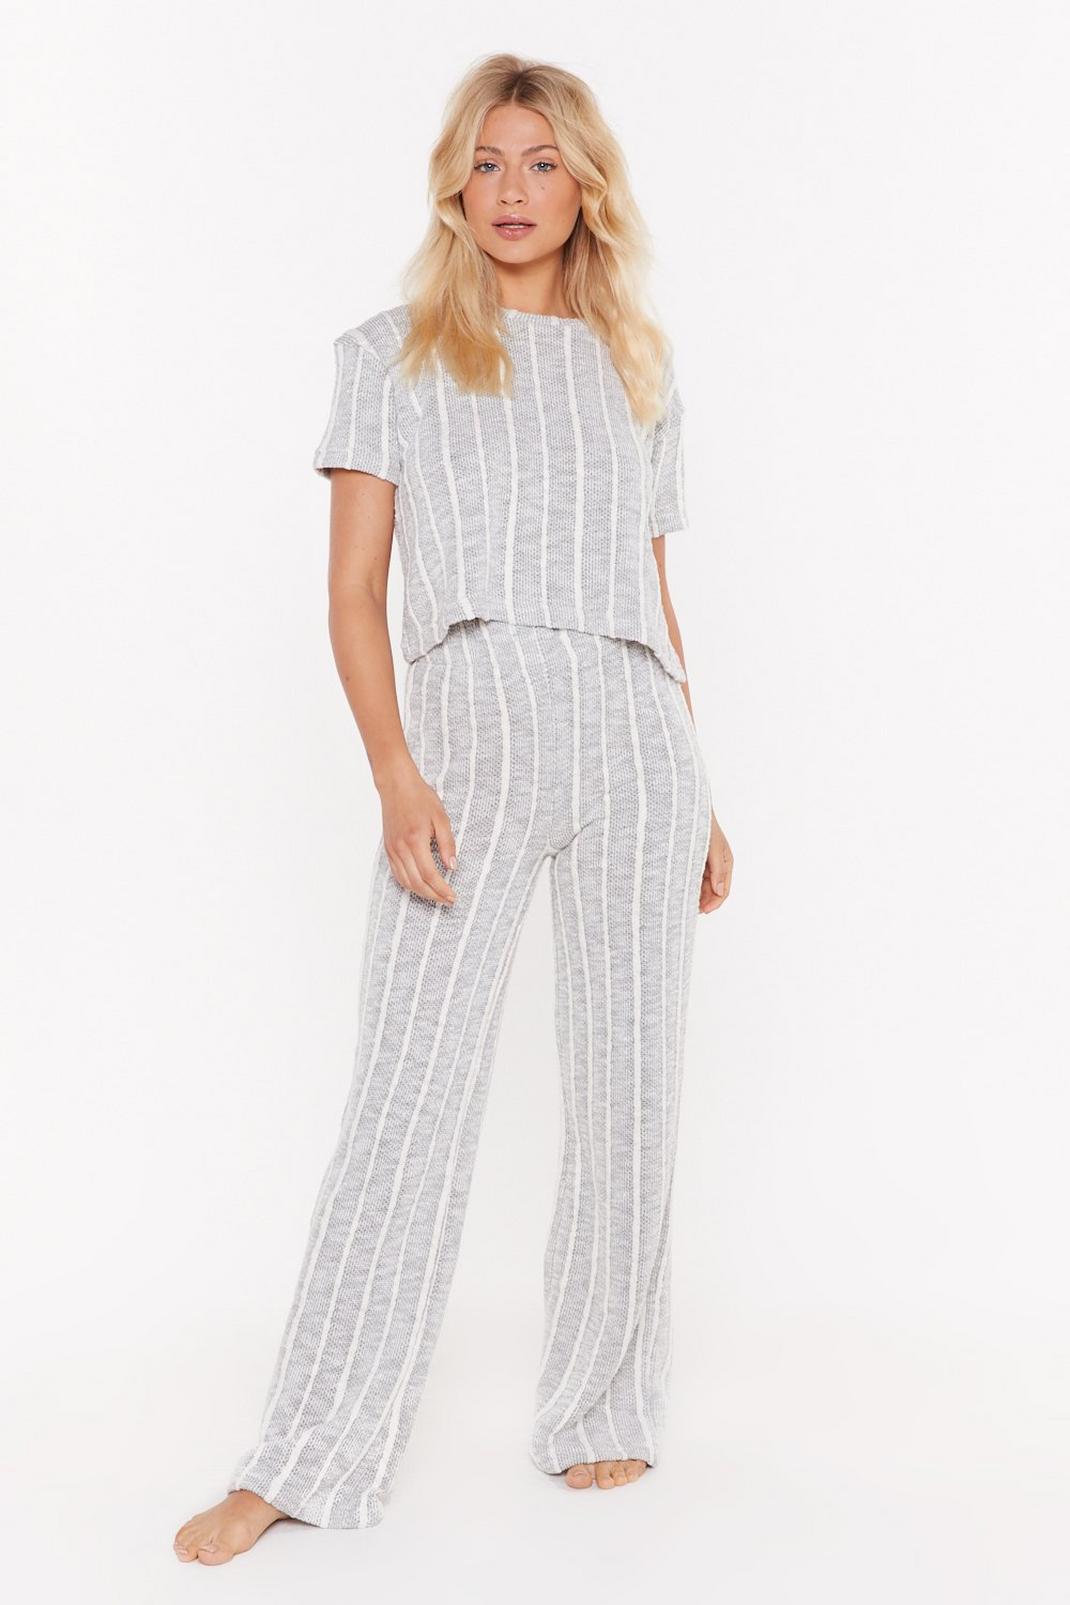 Be Done With Knit Striped Top and Trousers Lounge Set image number 1